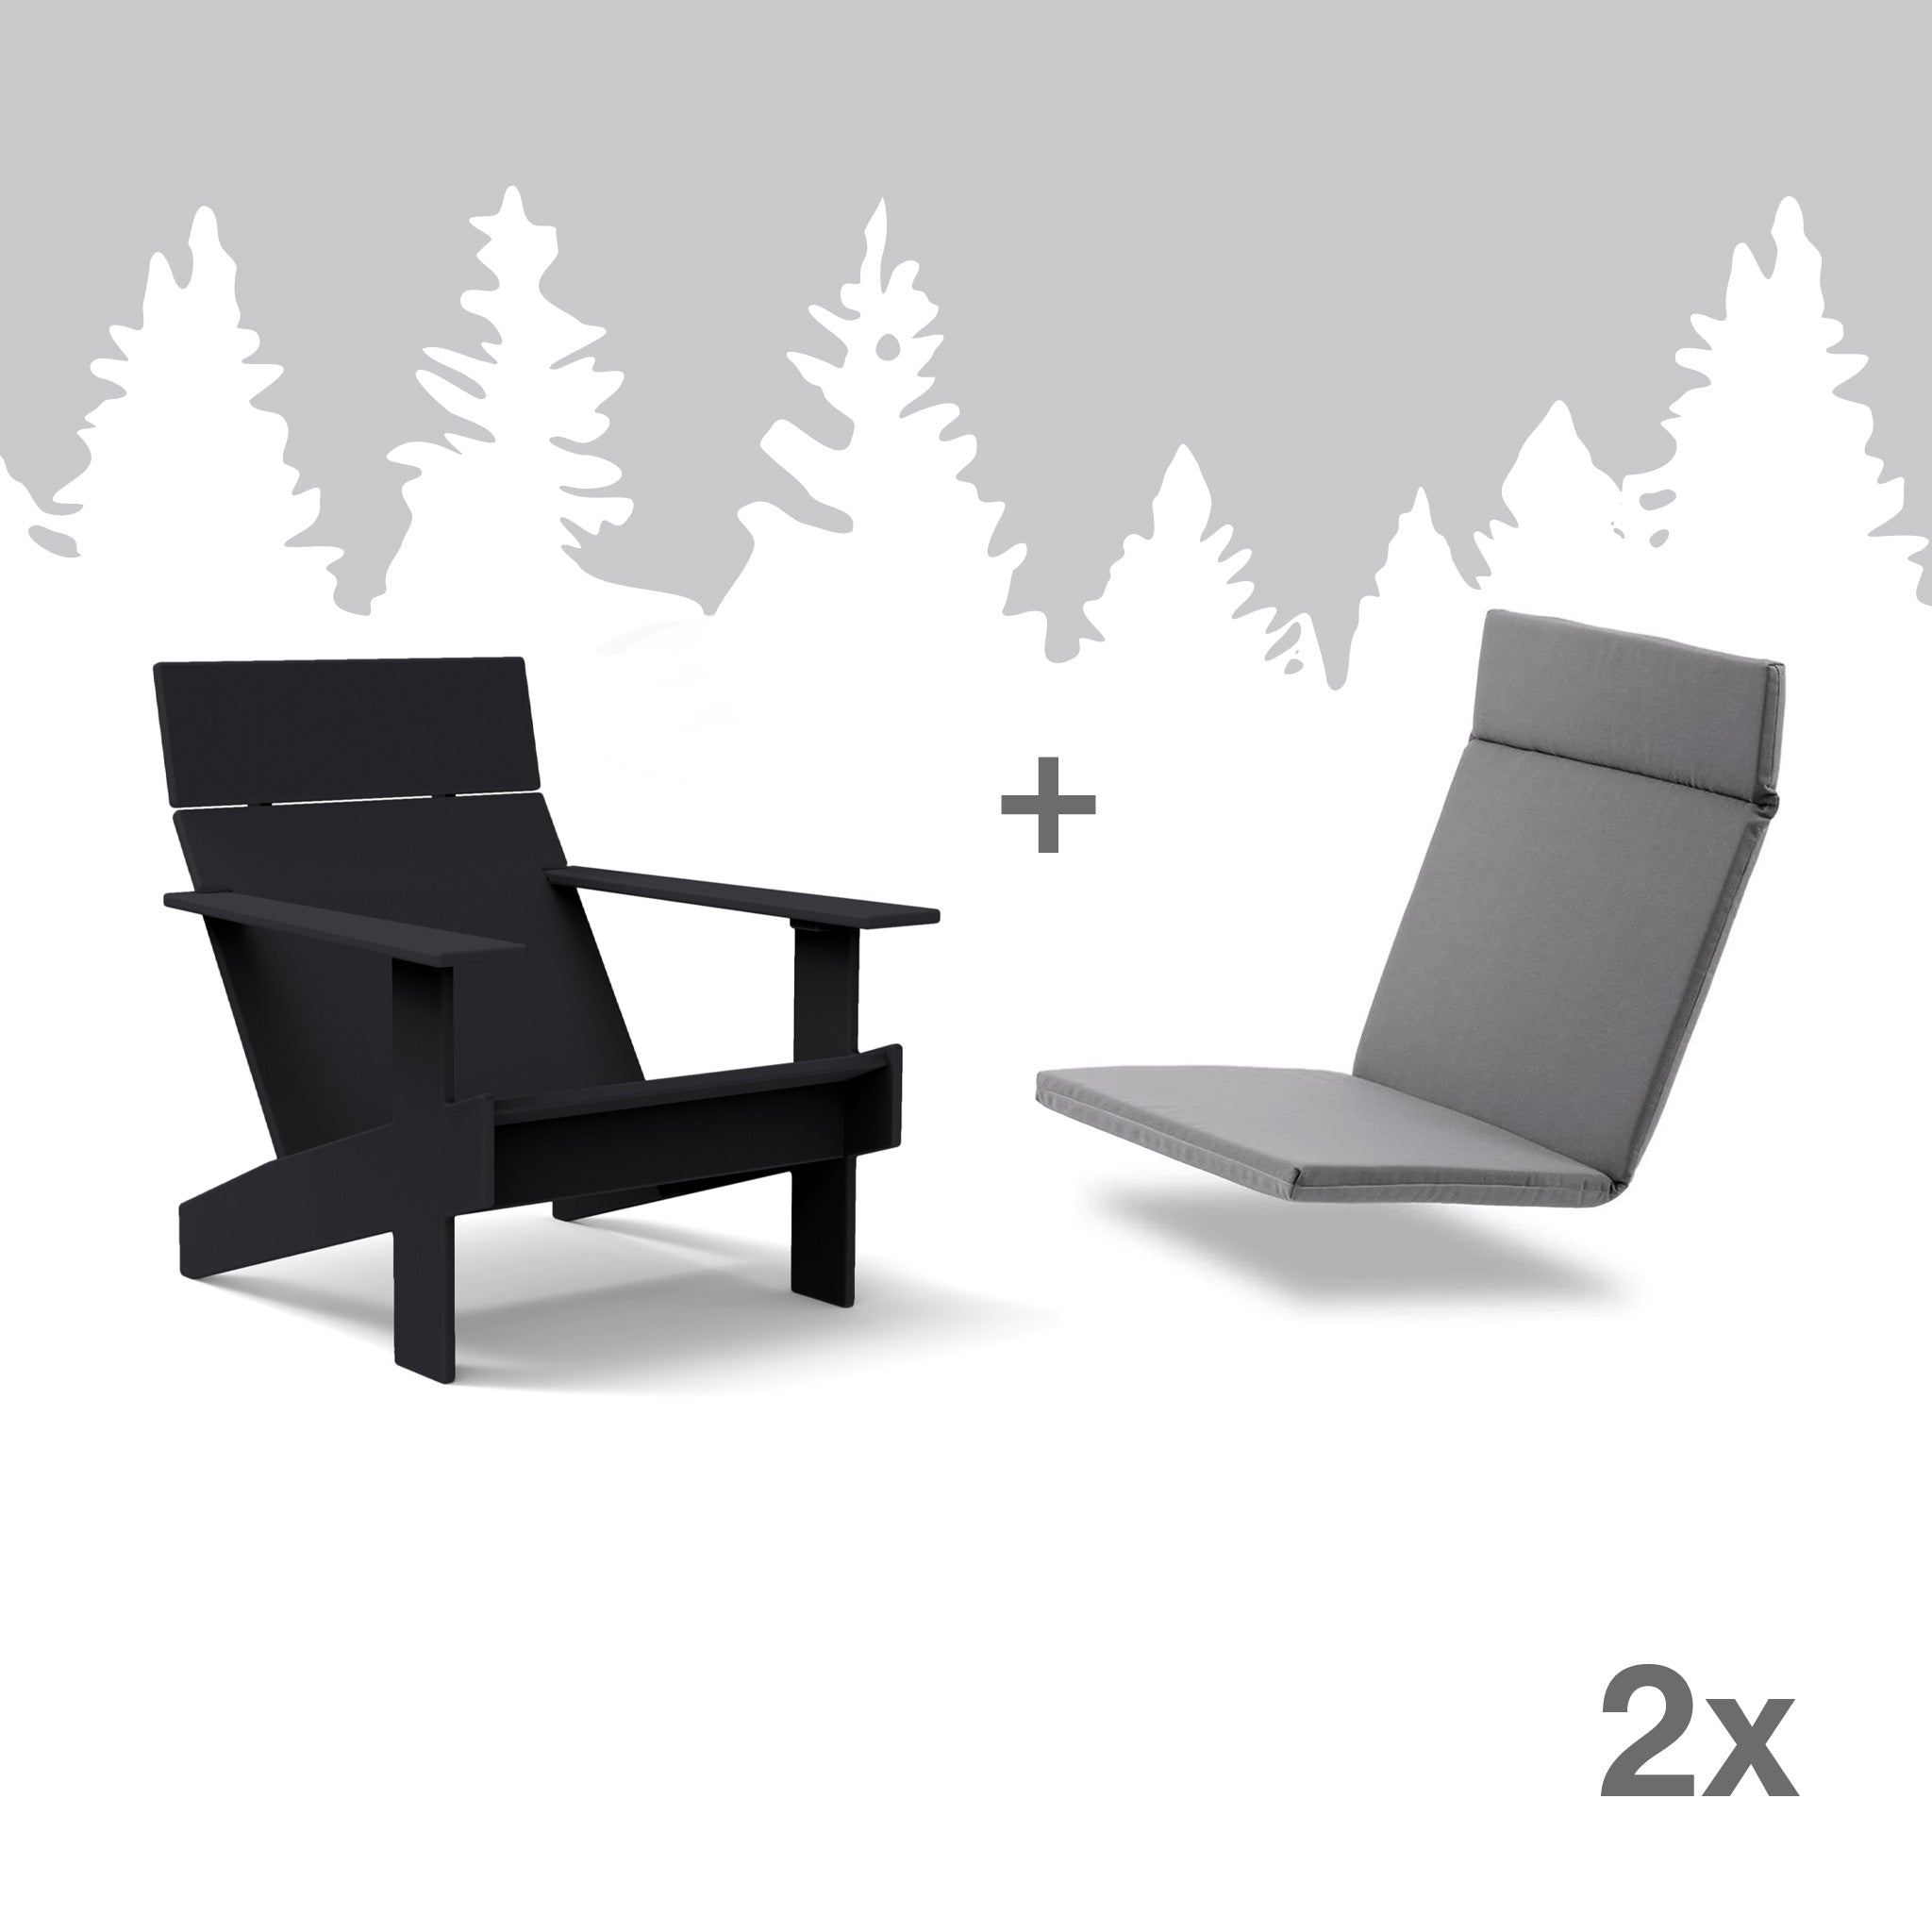 Driftwood Lollygagger Lounges + Charcoal Lollygagger Lounge Cushions Bundle